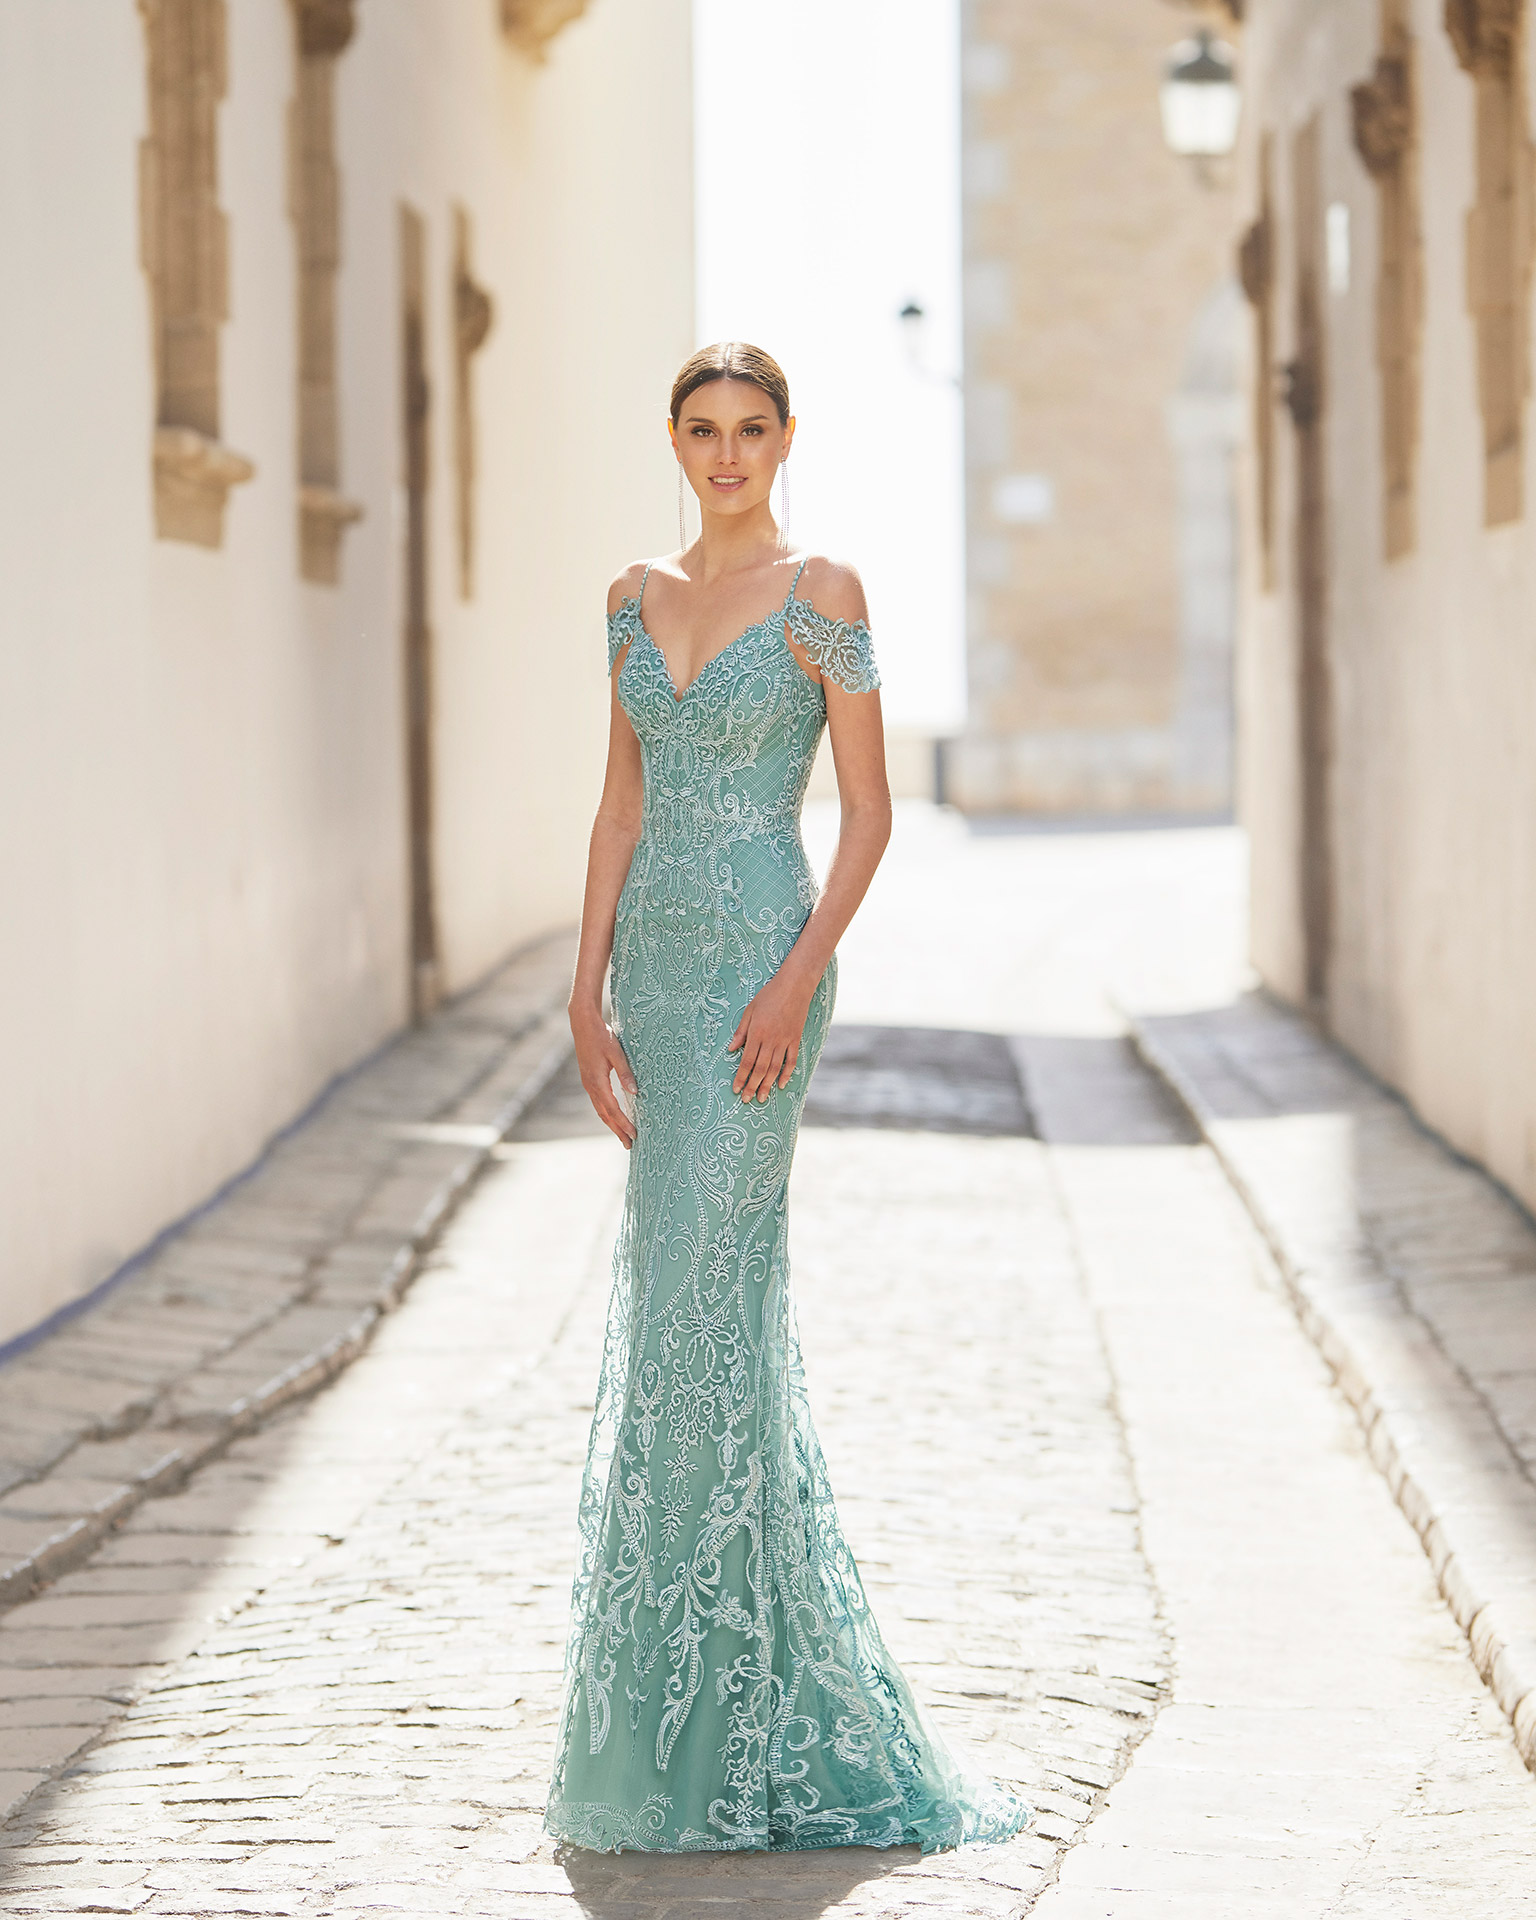 Lace cocktail dress. V-neckline and plunging back. With shawl. 2022 MARFIL_BARCELONA Collection.